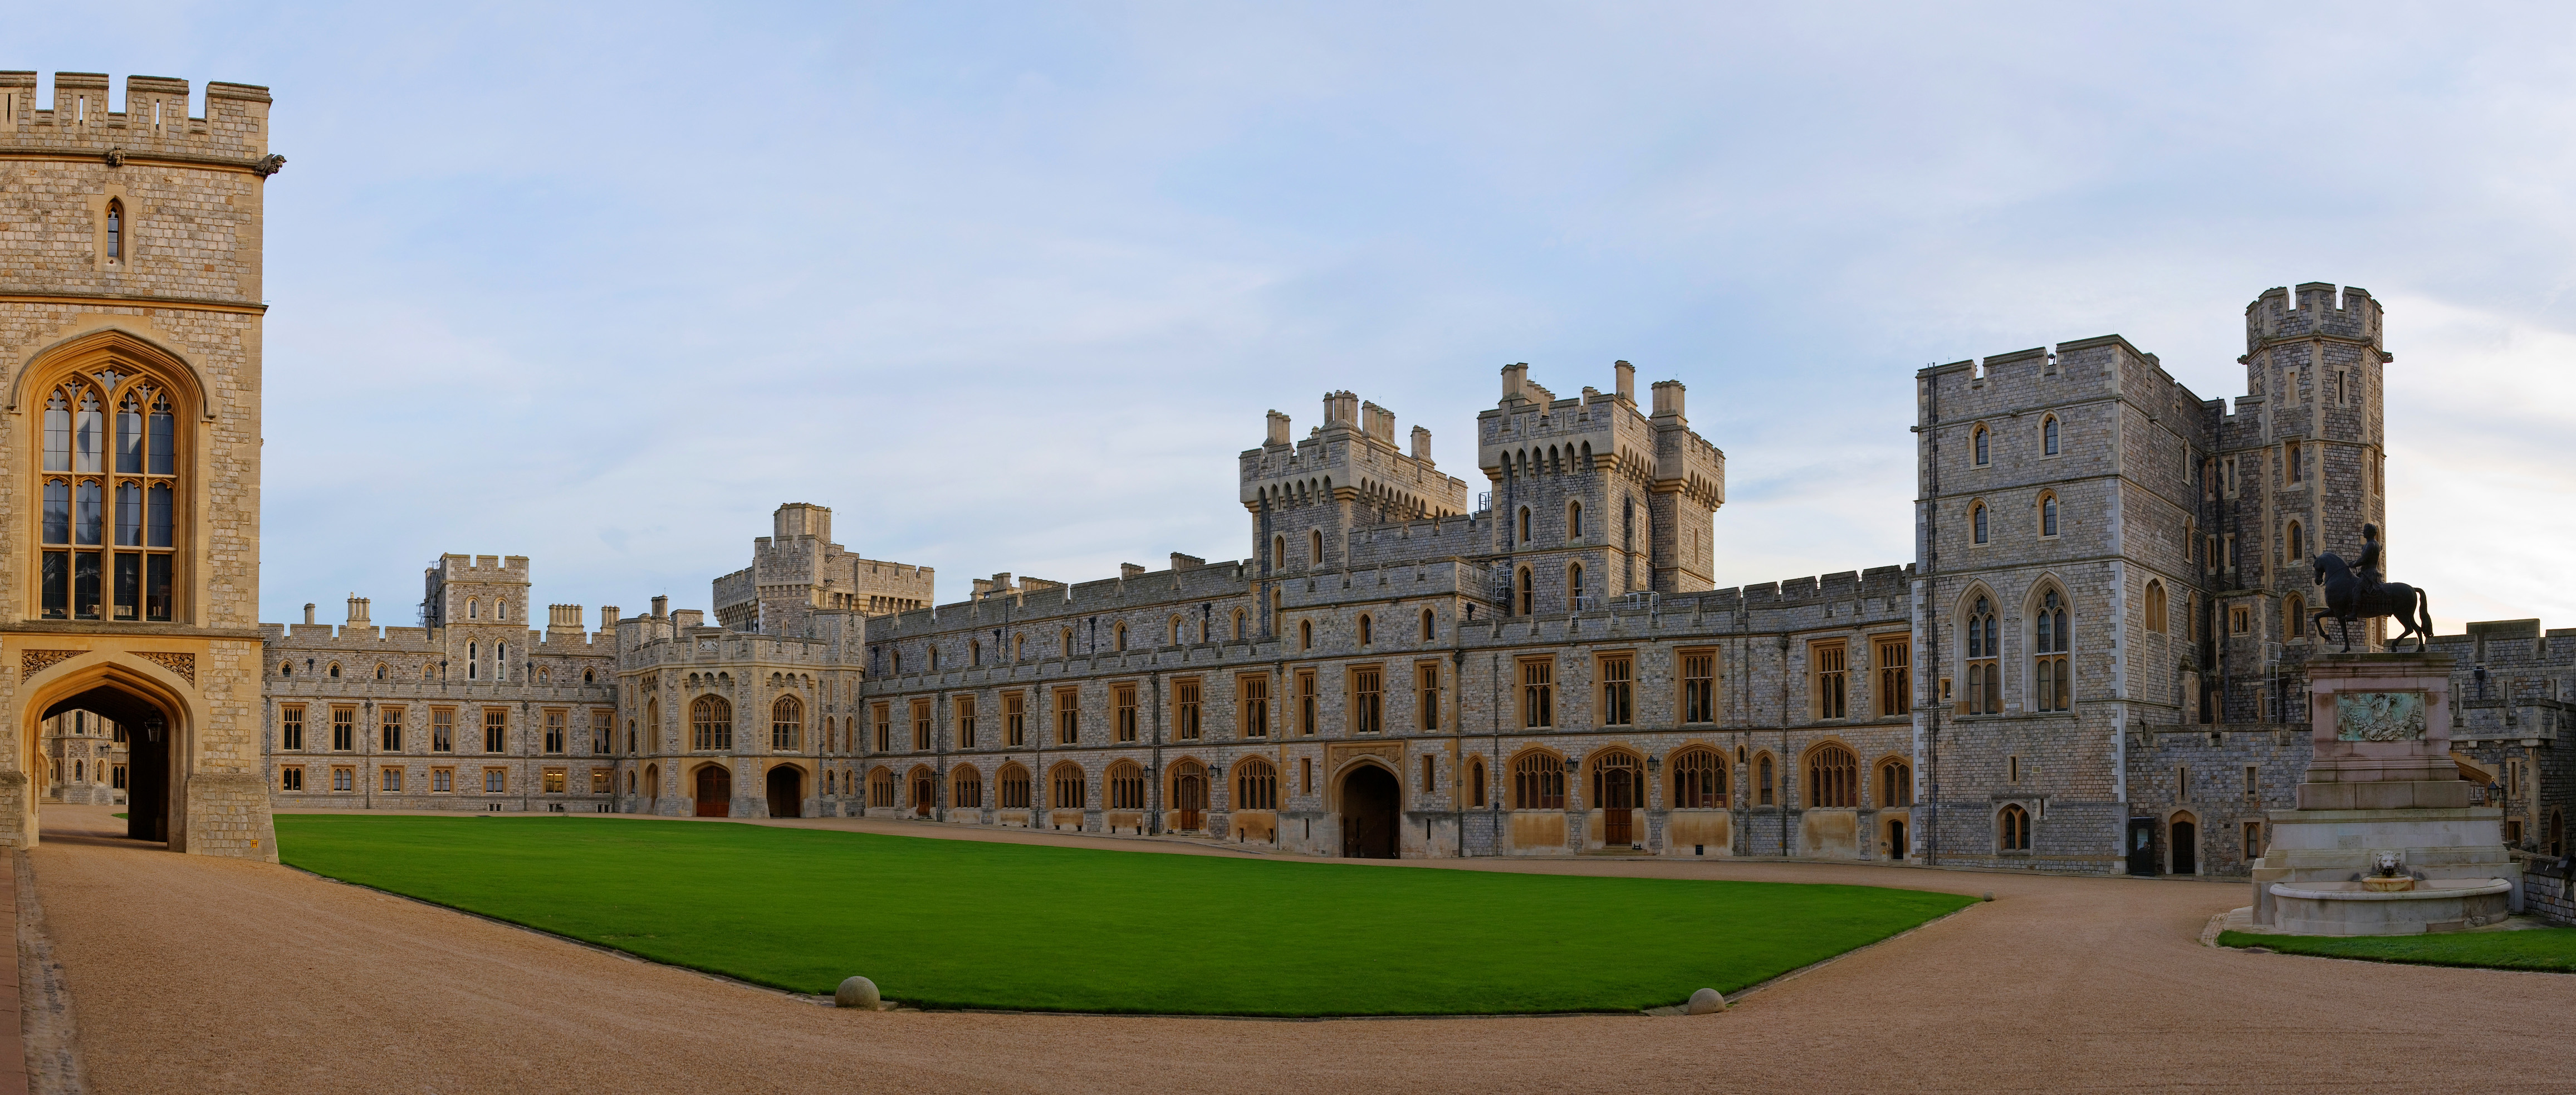 Windsor Castle Hosts First Public Event in 1000 Years: The Windsor ...